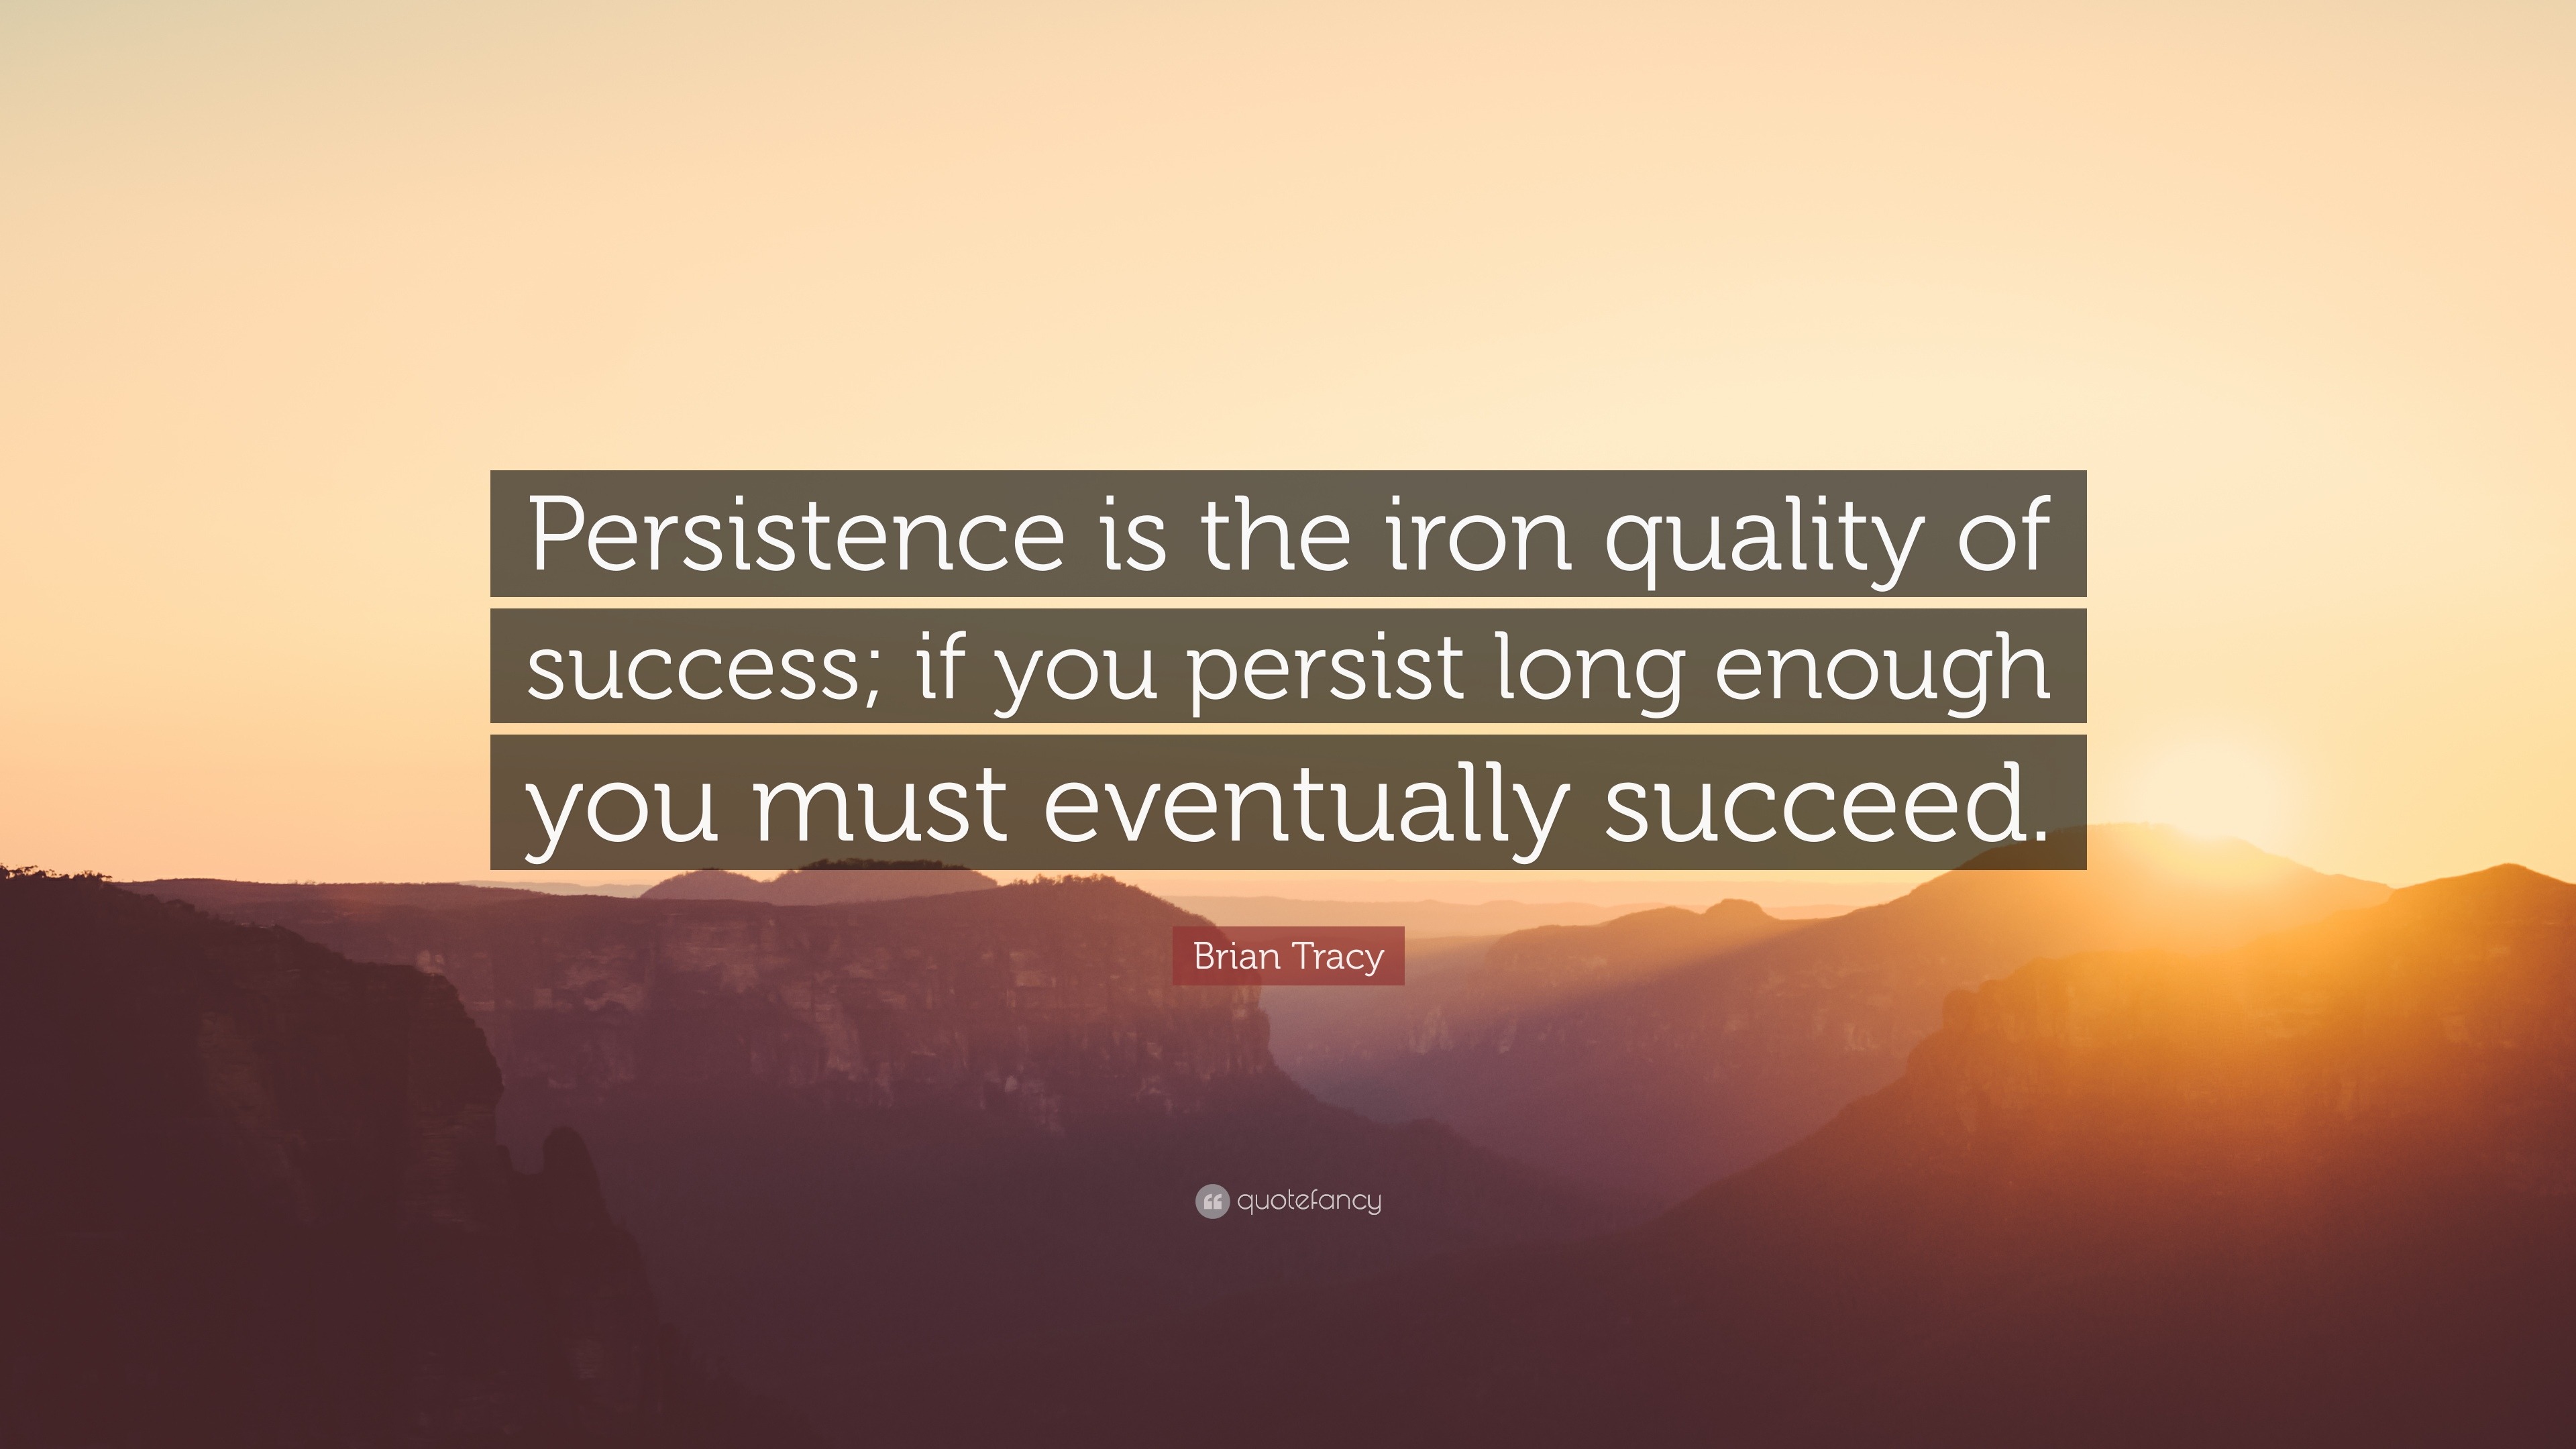 Brian Tracy Quote “Persistence is the iron quality of